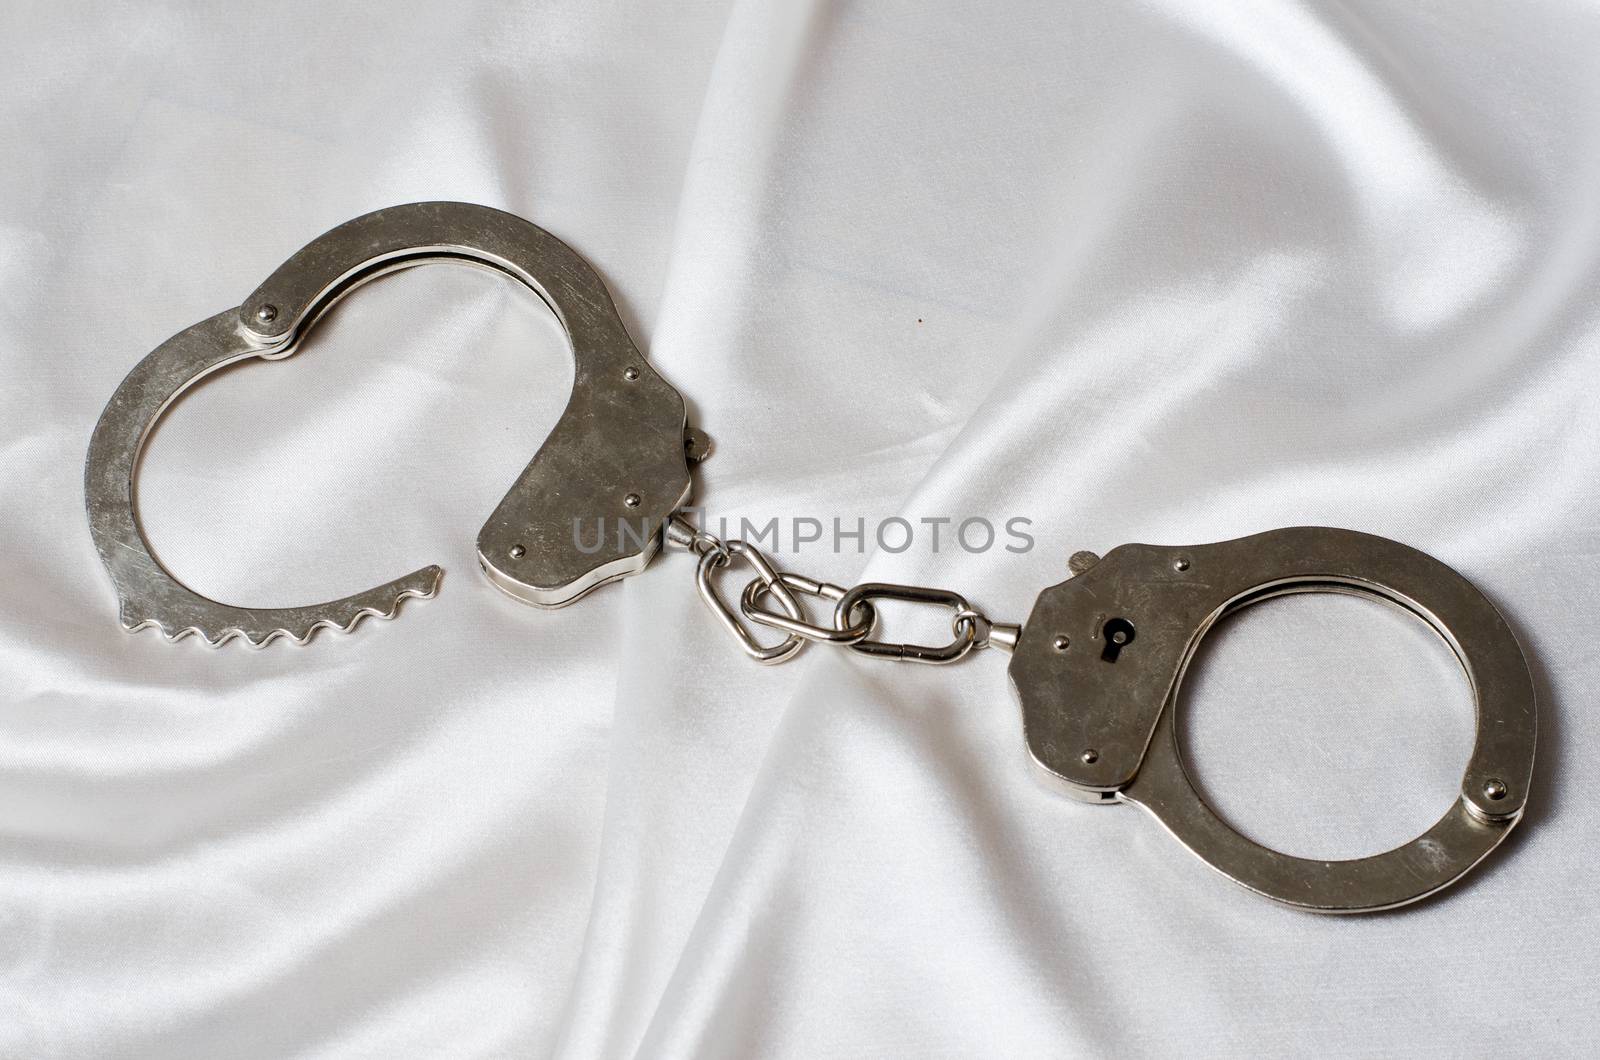 handcuffs on the satin background by sarkao